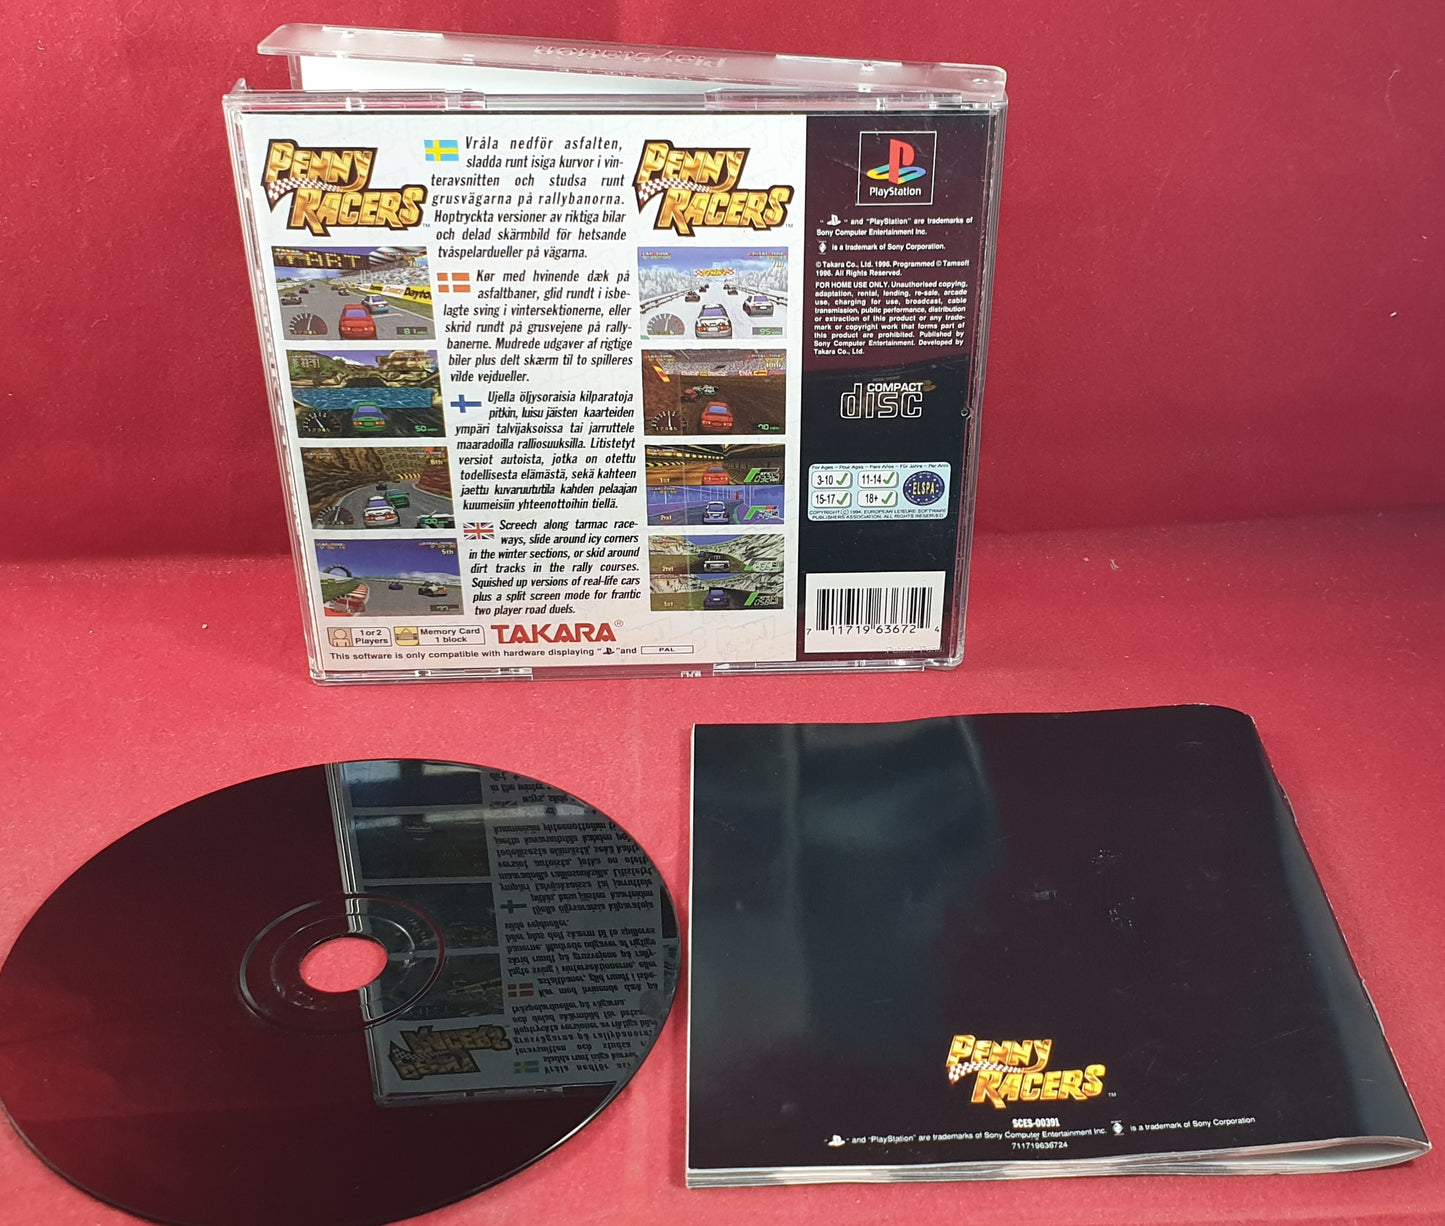 Penny Racers AKA Choro Q: Ver.1.02 Sony Playstation 1 (PS1) RARE Game